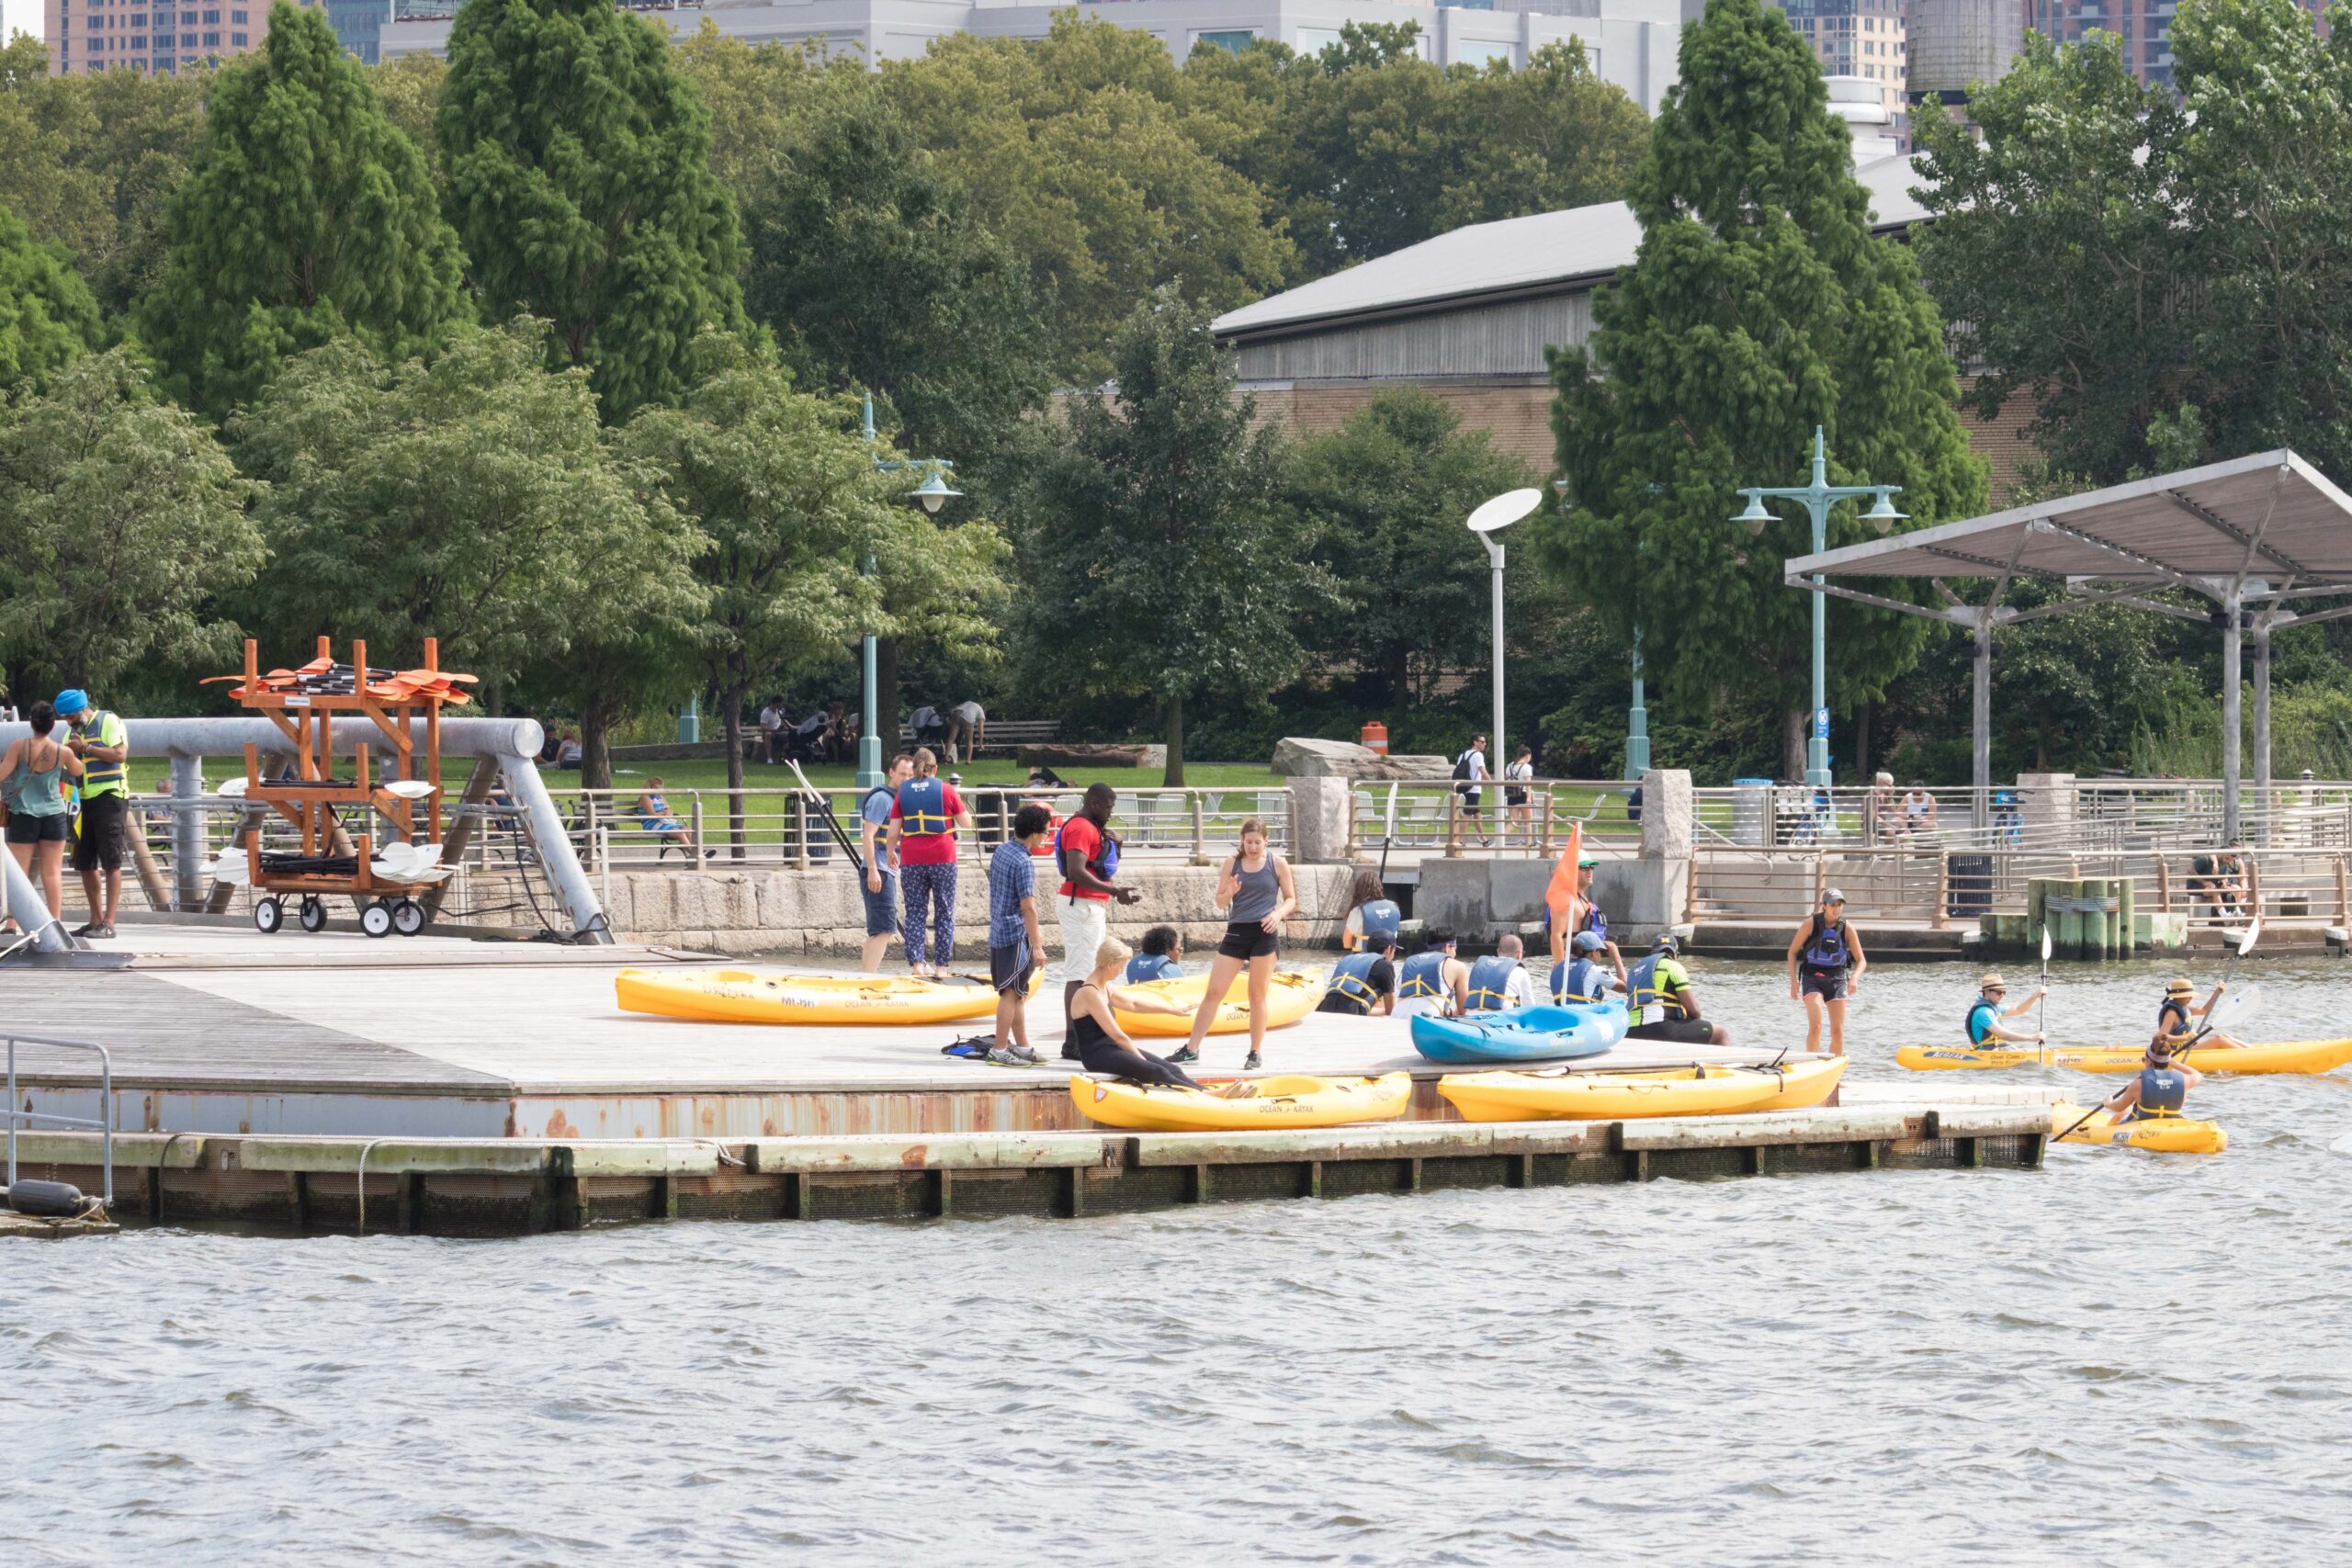 Kayakers enjoy a day on the river at the Pier 96 boathouse